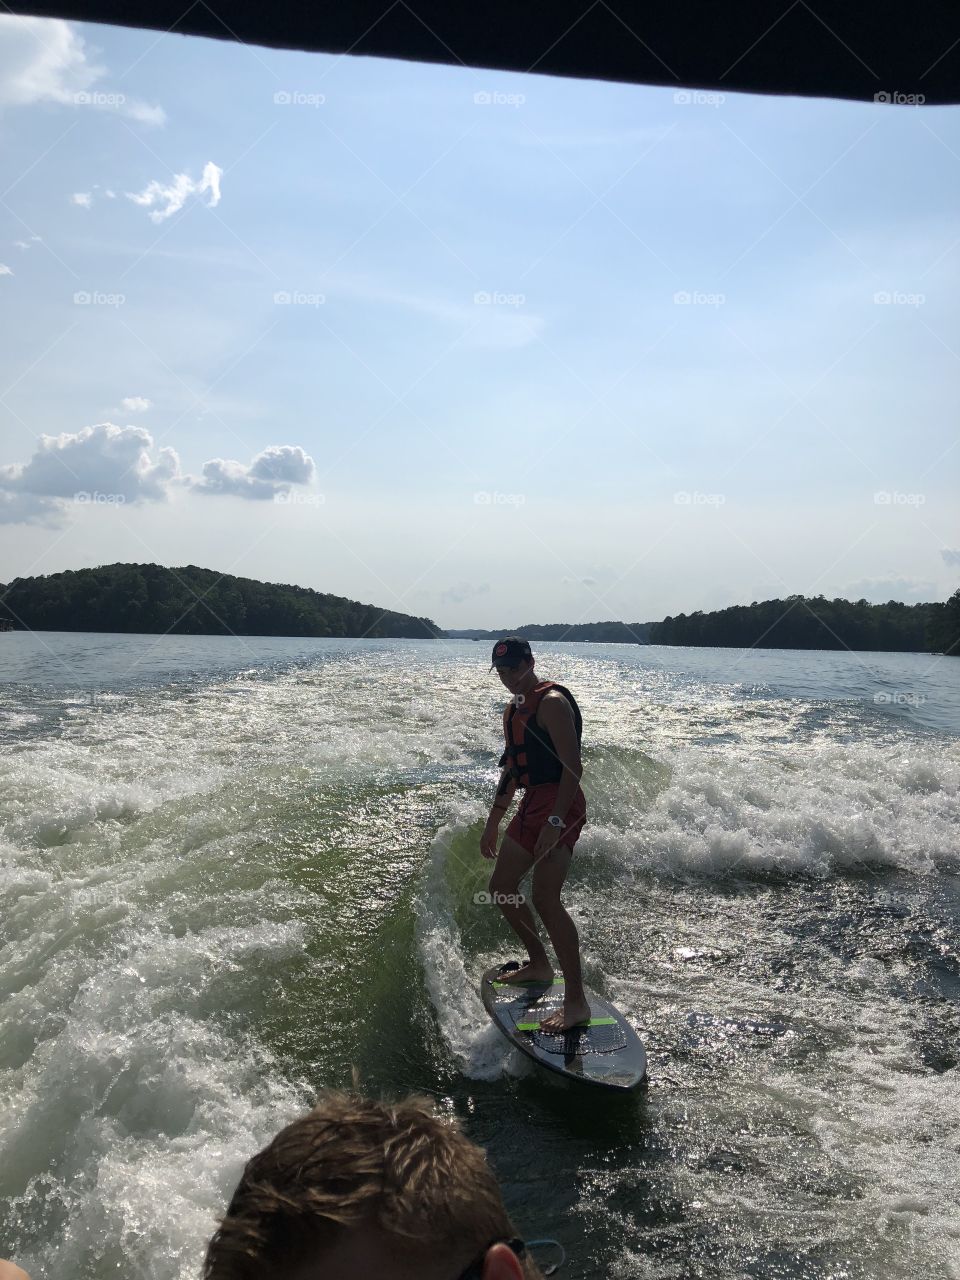 Lake surfing all day. 